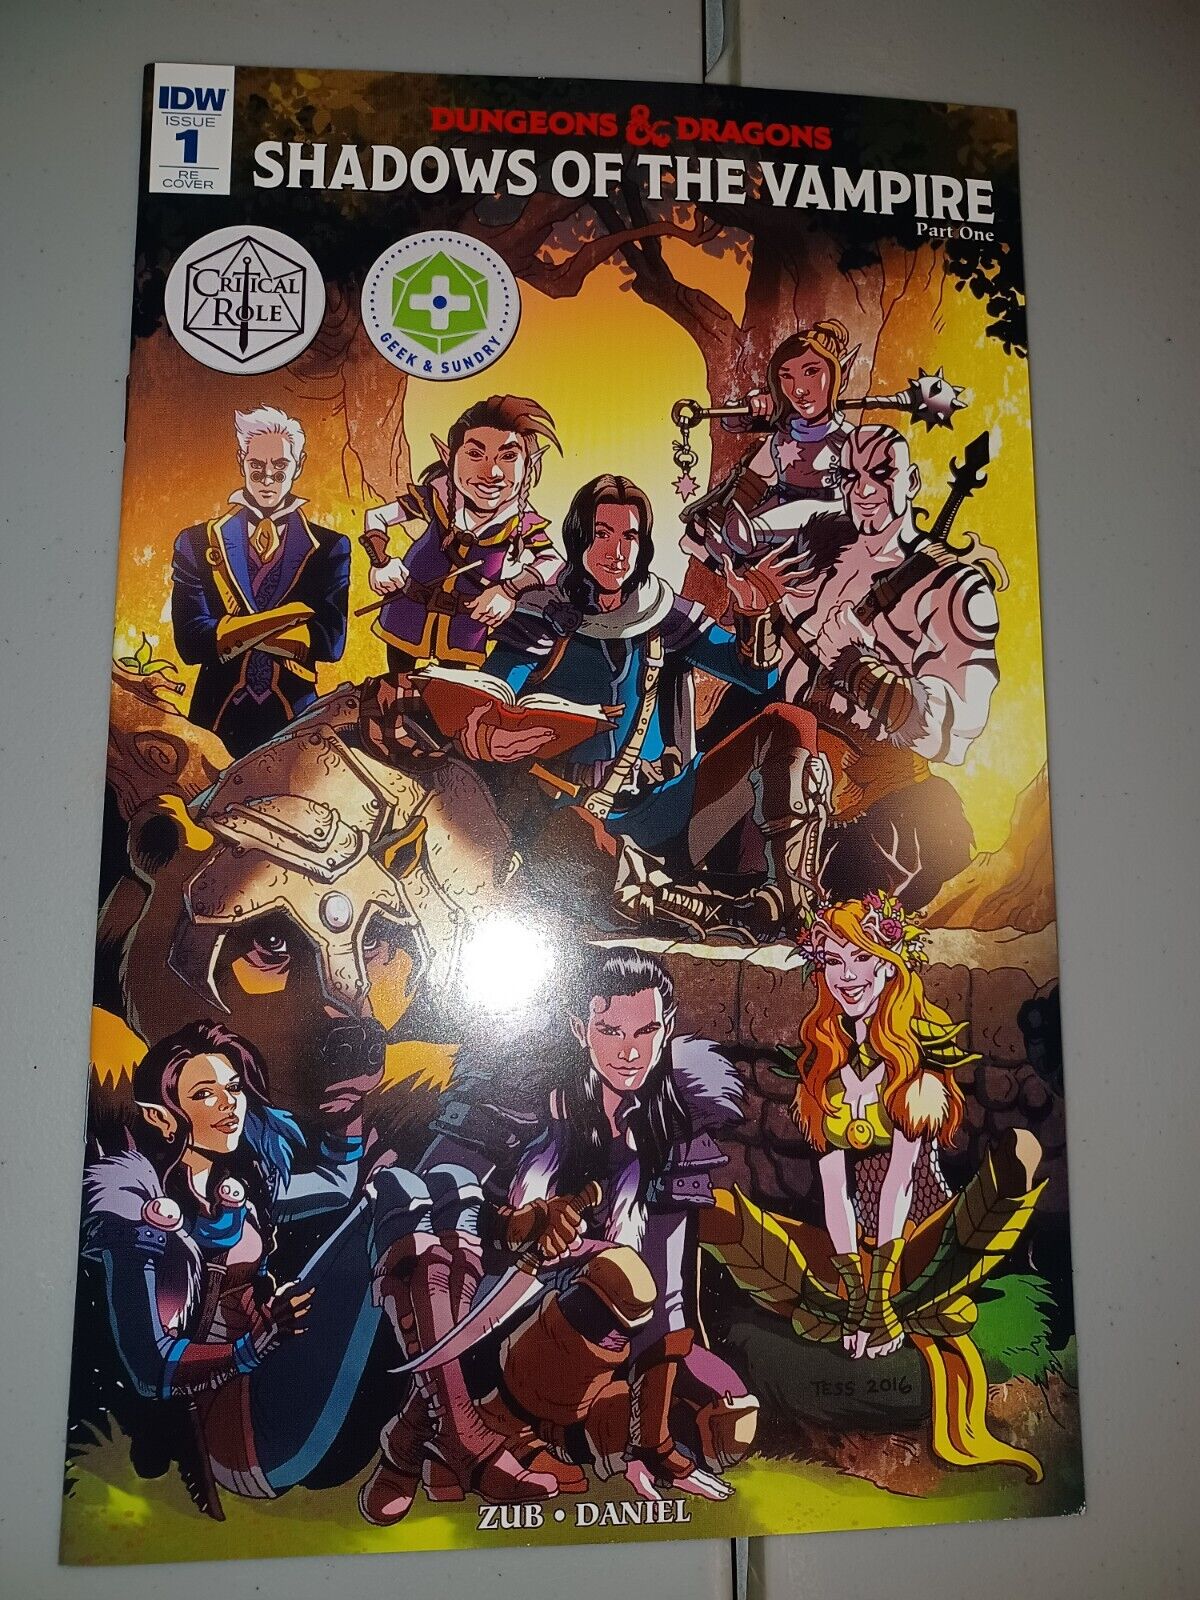 Critical Role: Vox Machina \'Shadows of the Vampire\' DnD D&D IDW 2016 Comic Book